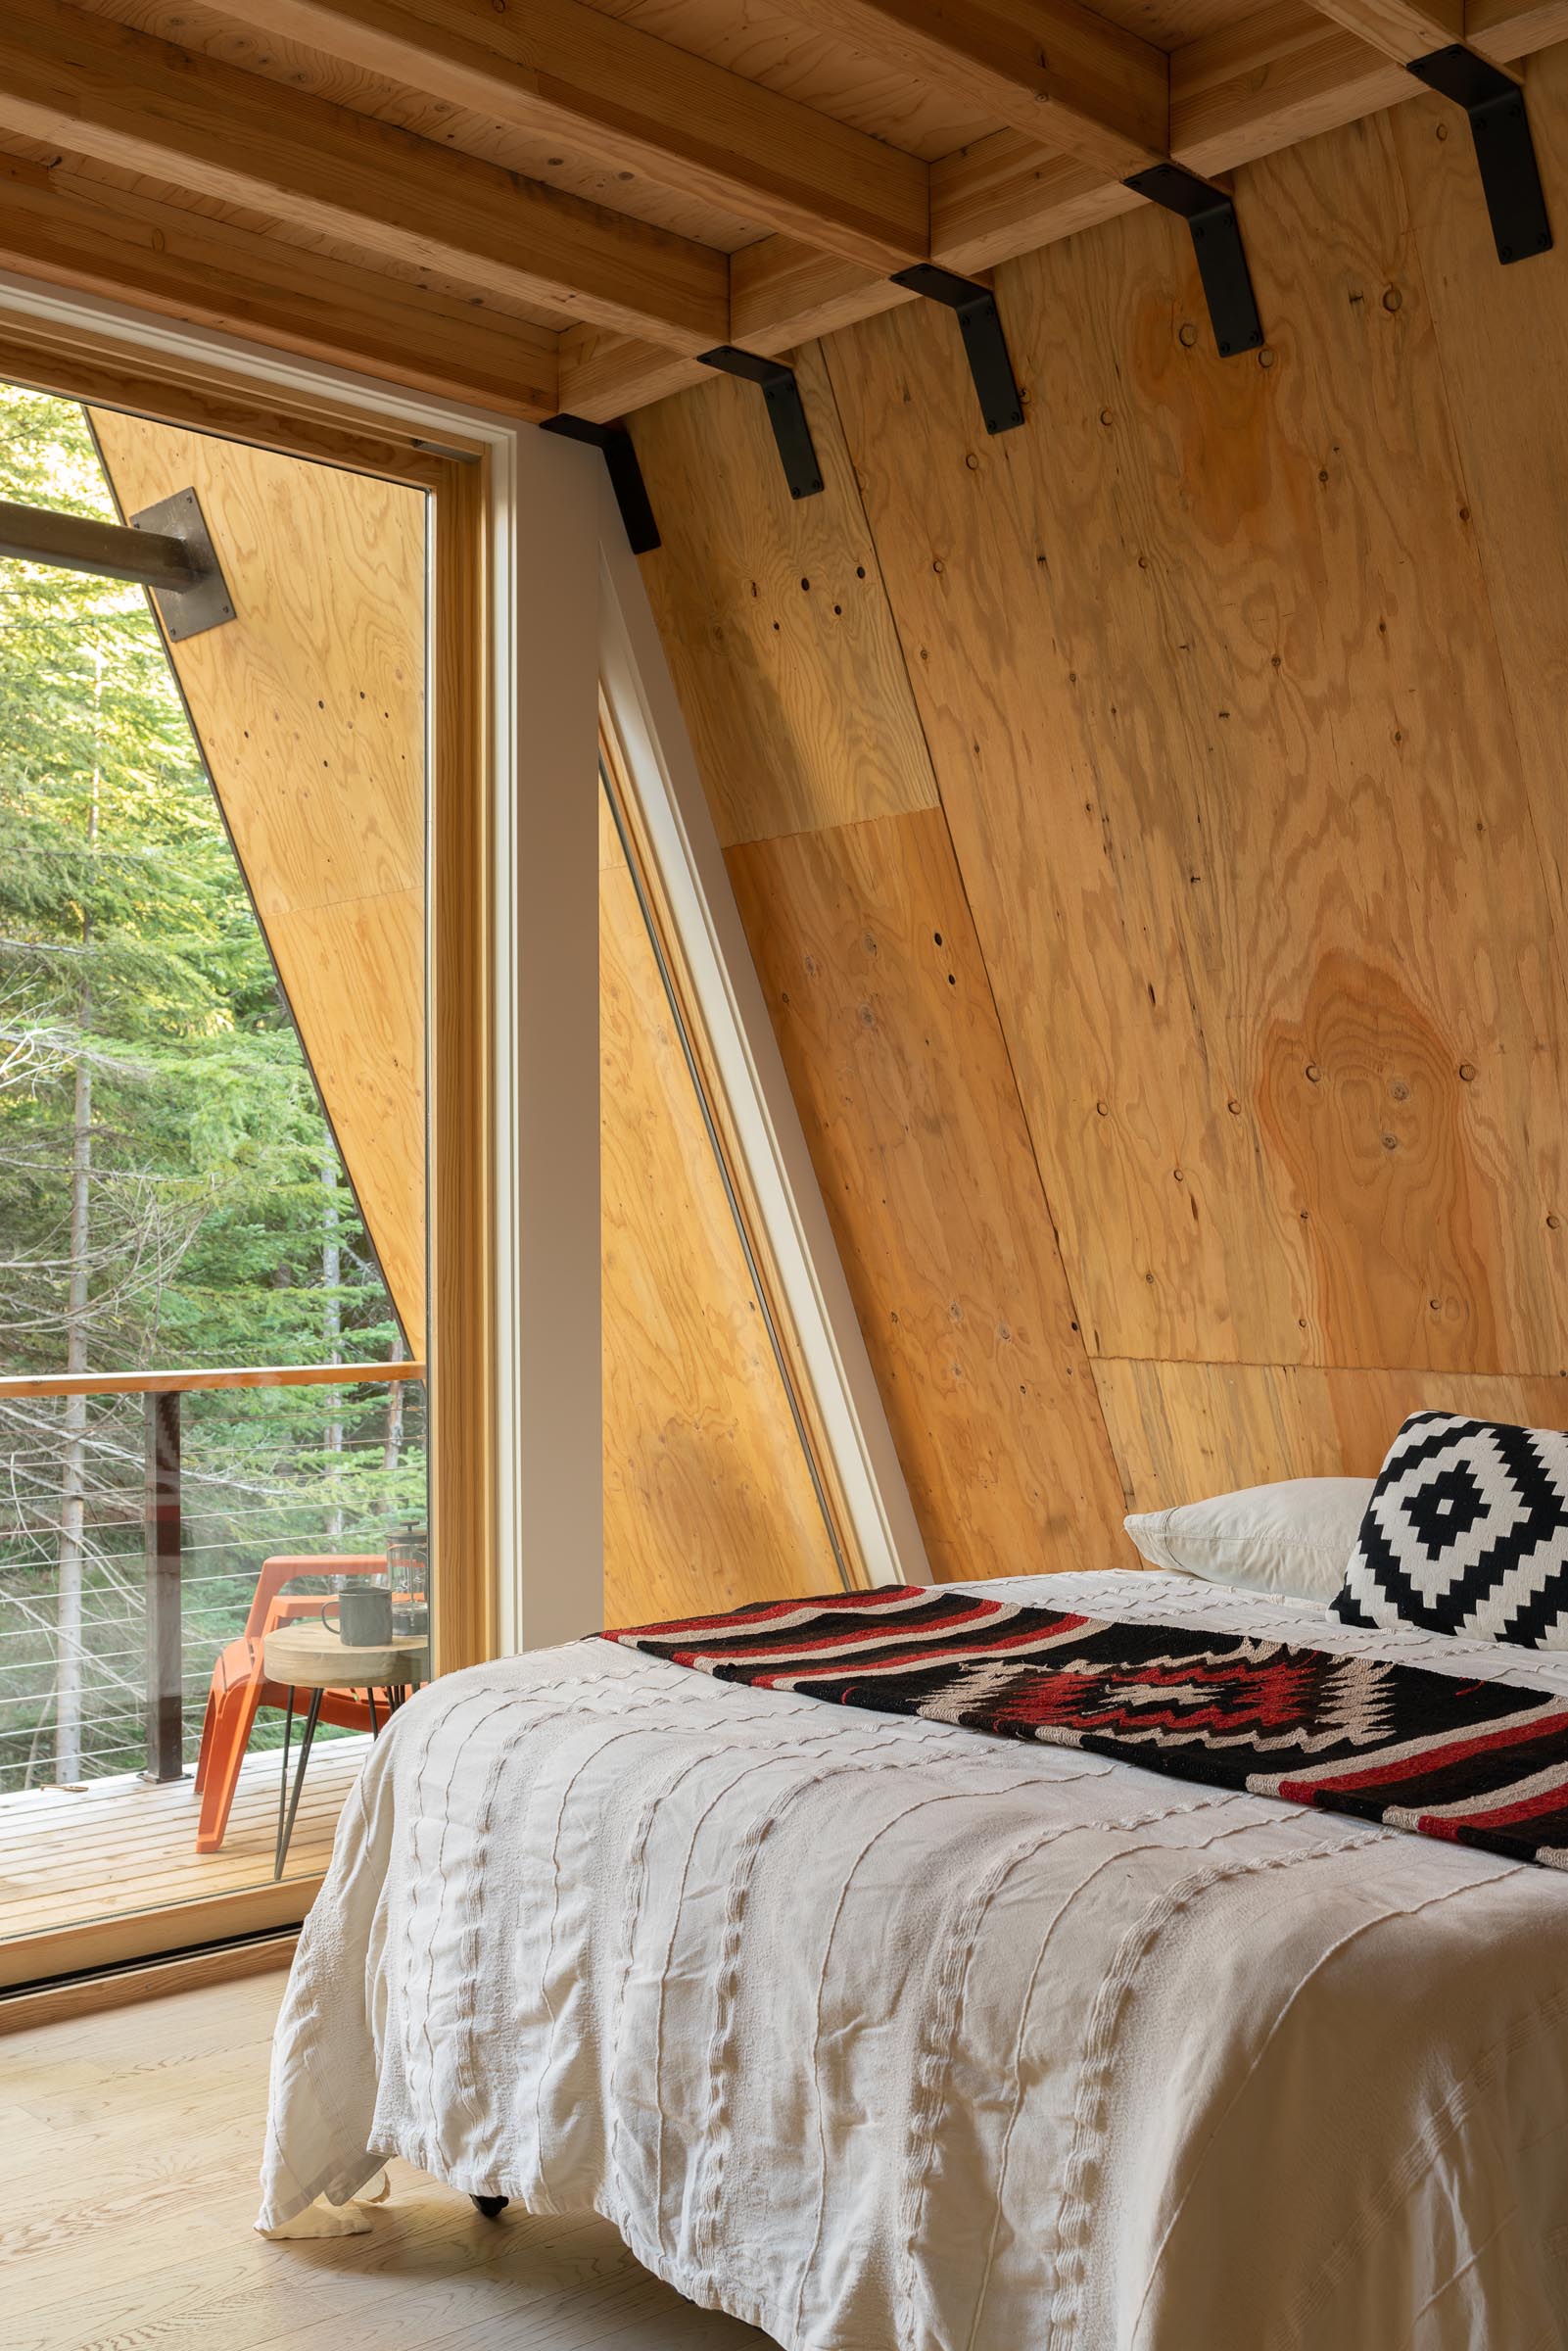 A bedroom in a modern A-frame cabin.